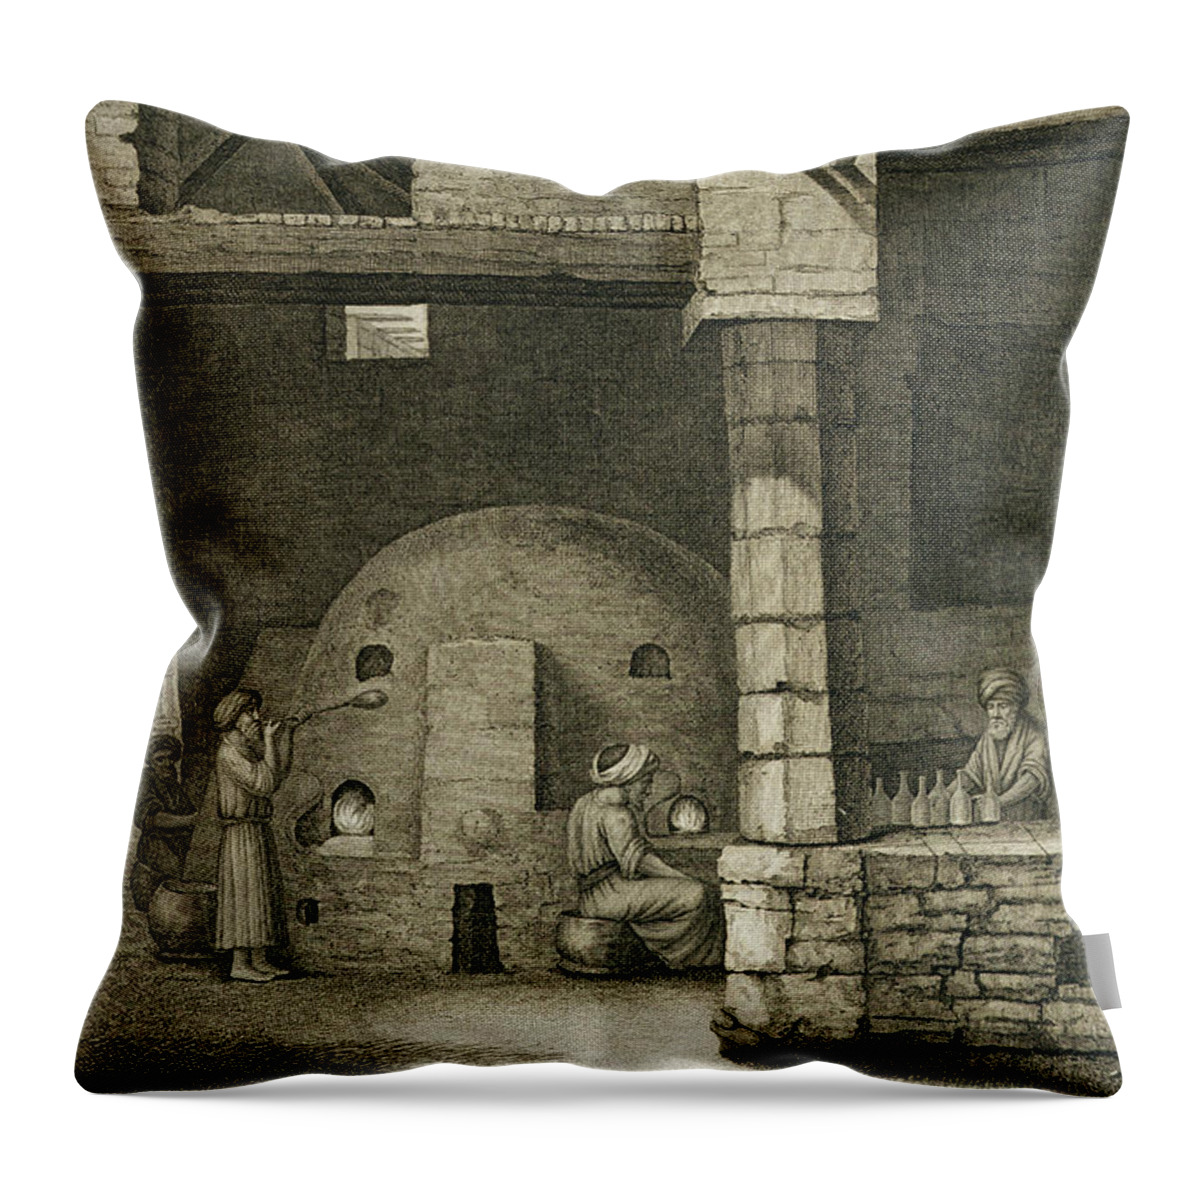 Print Throw Pillow featuring the drawing The Glass Bottle Maker, From Volume II by Nicolas Jacques Conte